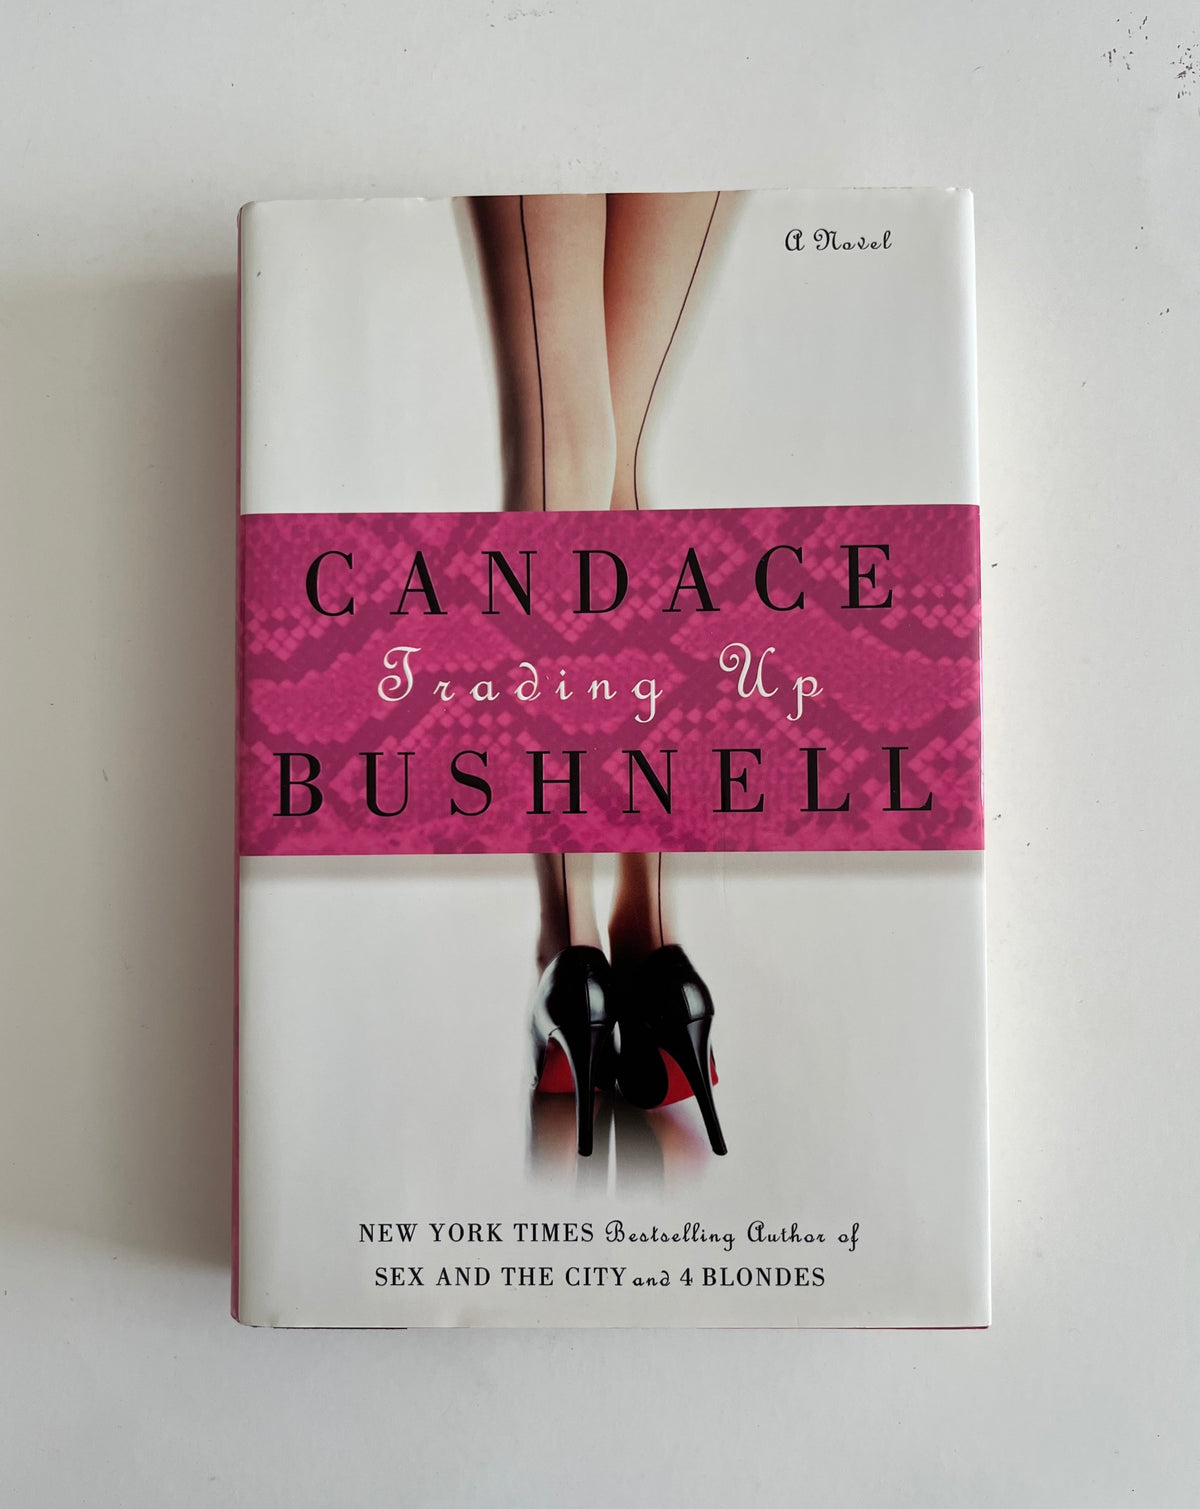 Trading Up by Candice Bushnell